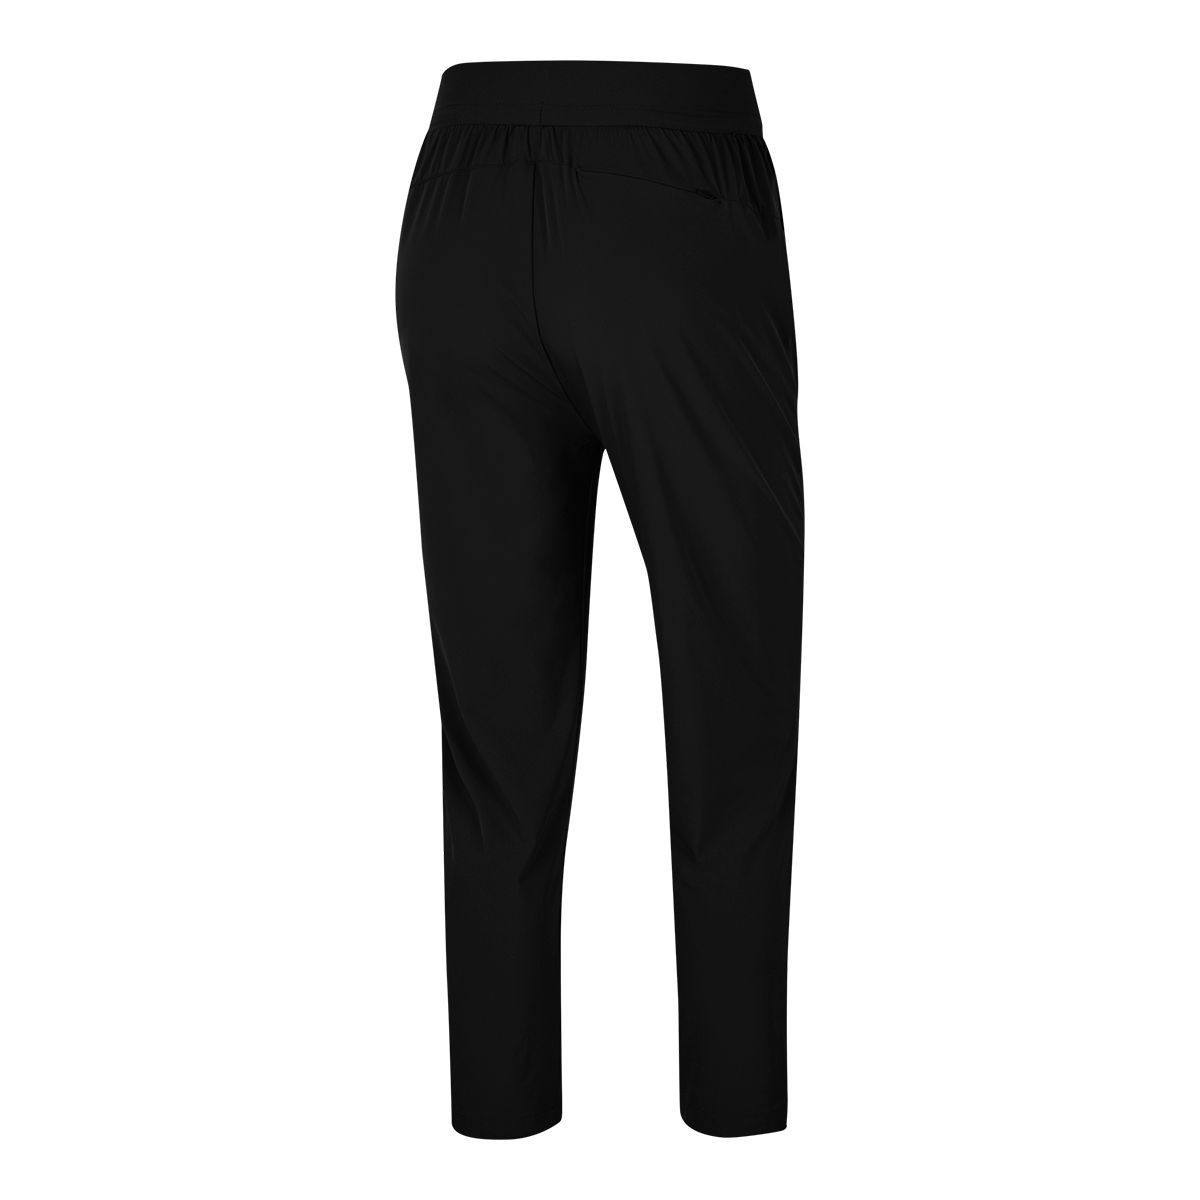 People on TikTok are loving the Nike Bliss Luxe Pants for wearing to work